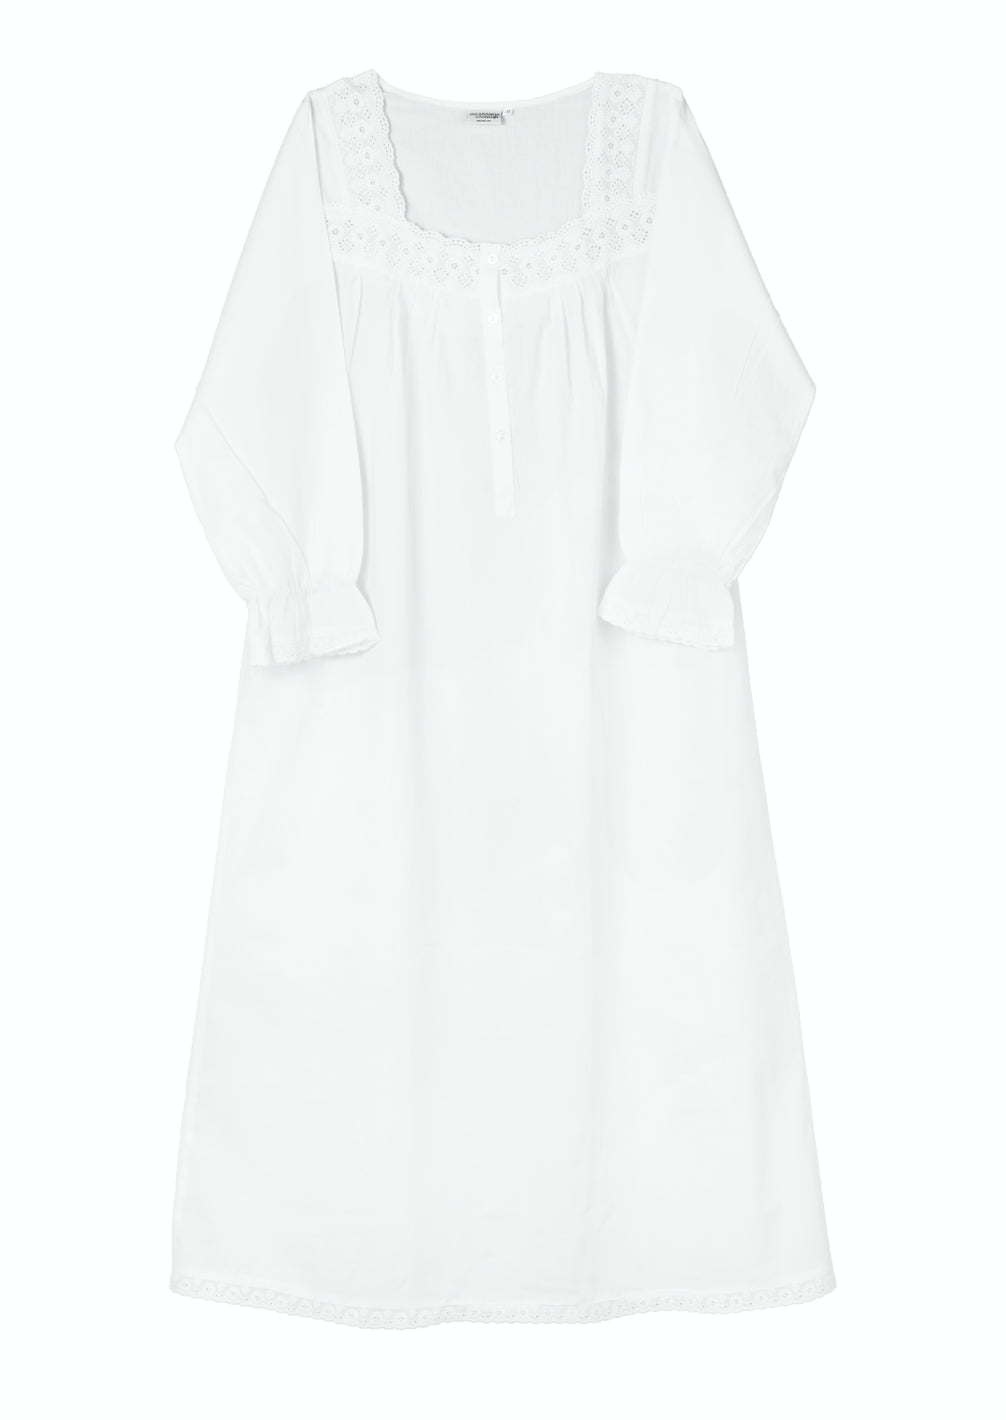 Susan Sleeve Over Nightgown The White Long | Moon Cotton